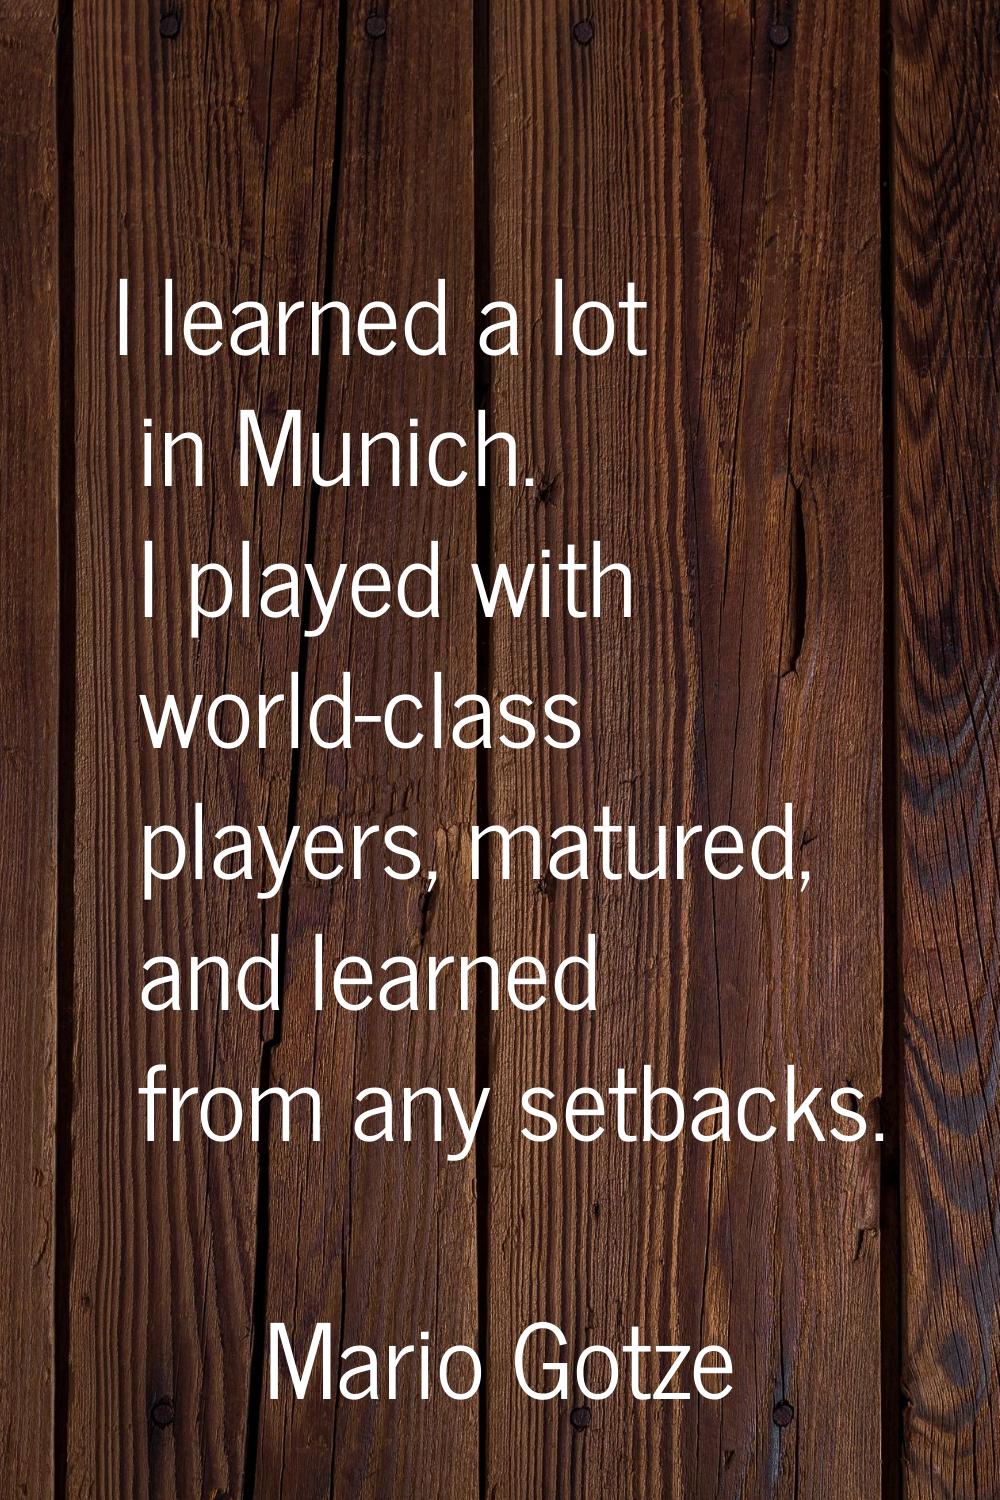 I learned a lot in Munich. I played with world-class players, matured, and learned from any setback